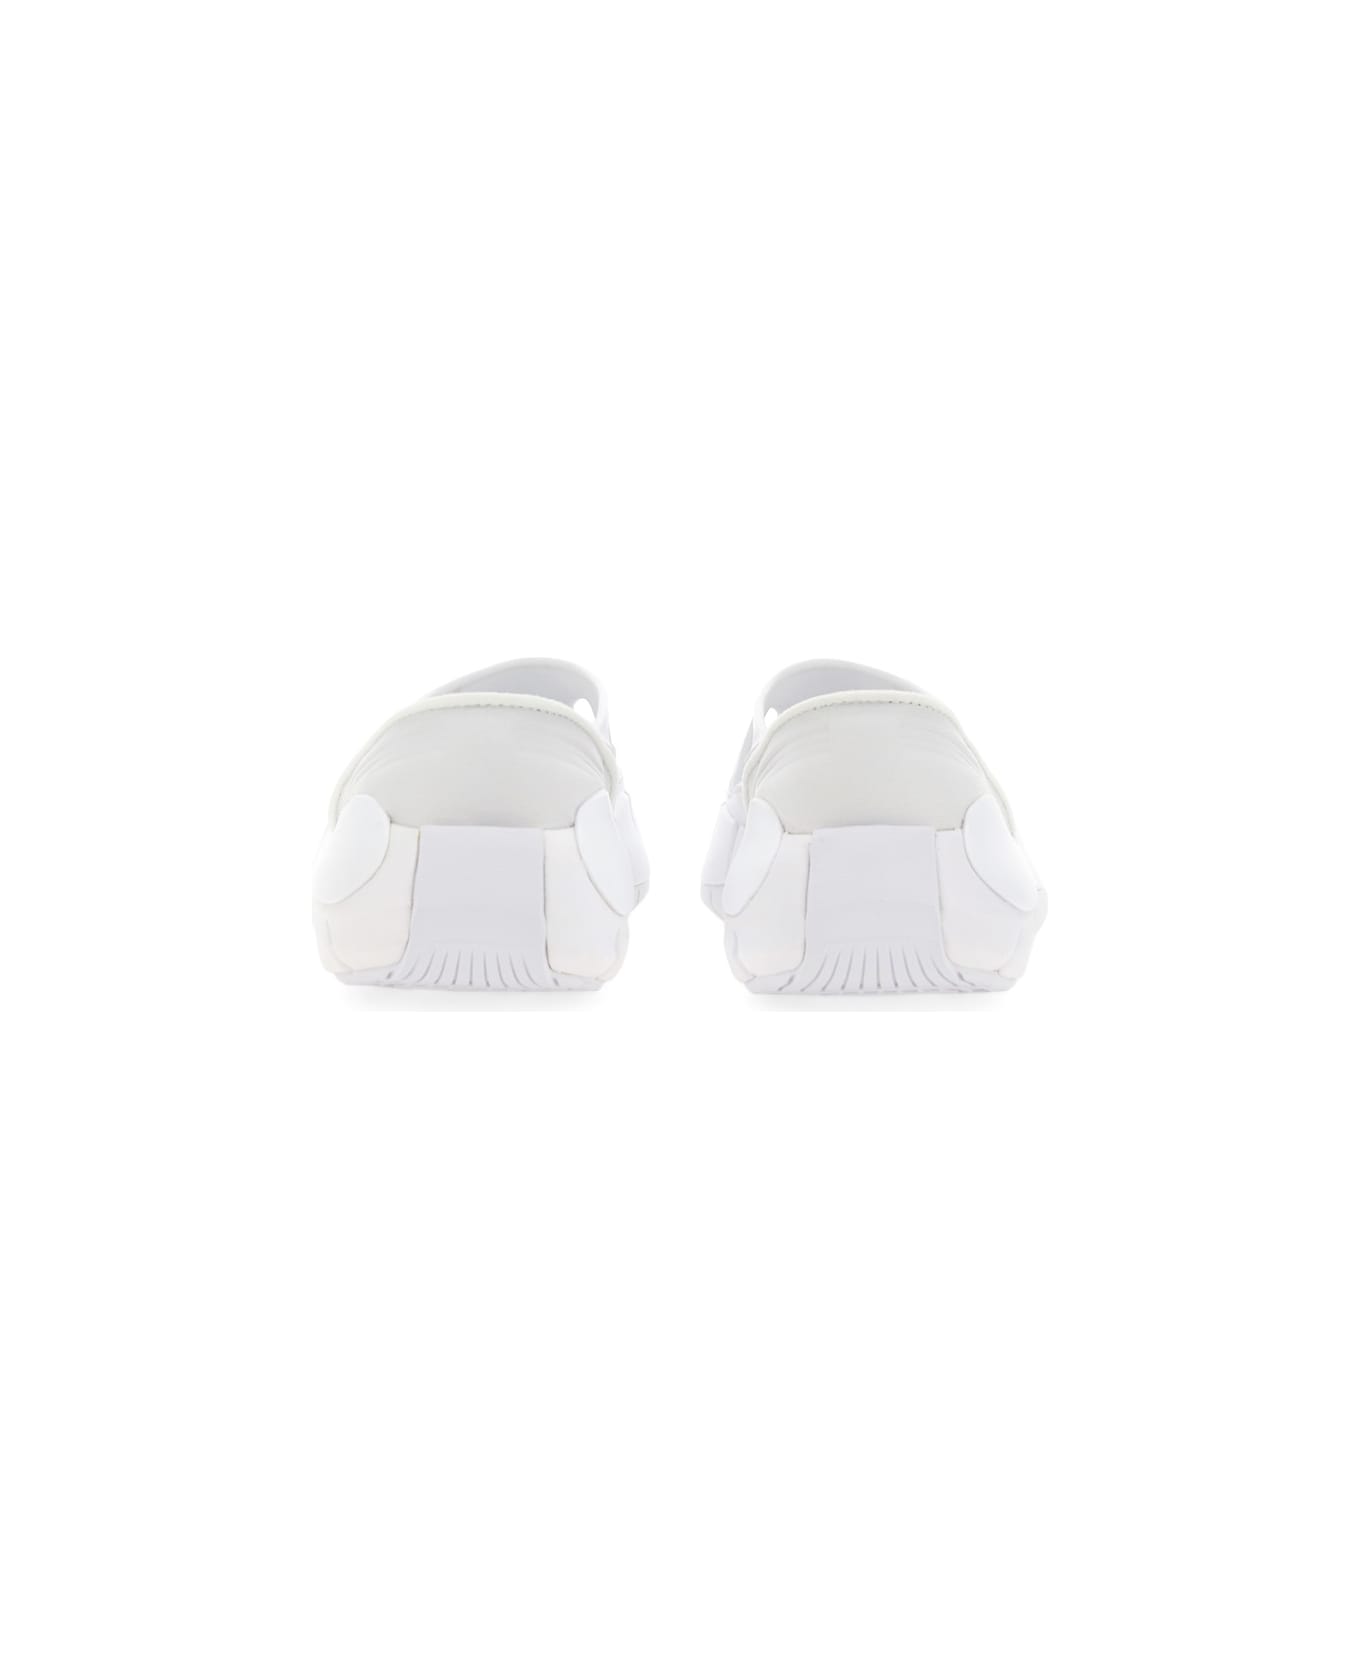 Maison Margiela Sneakers Project 0 Cr - WHITE